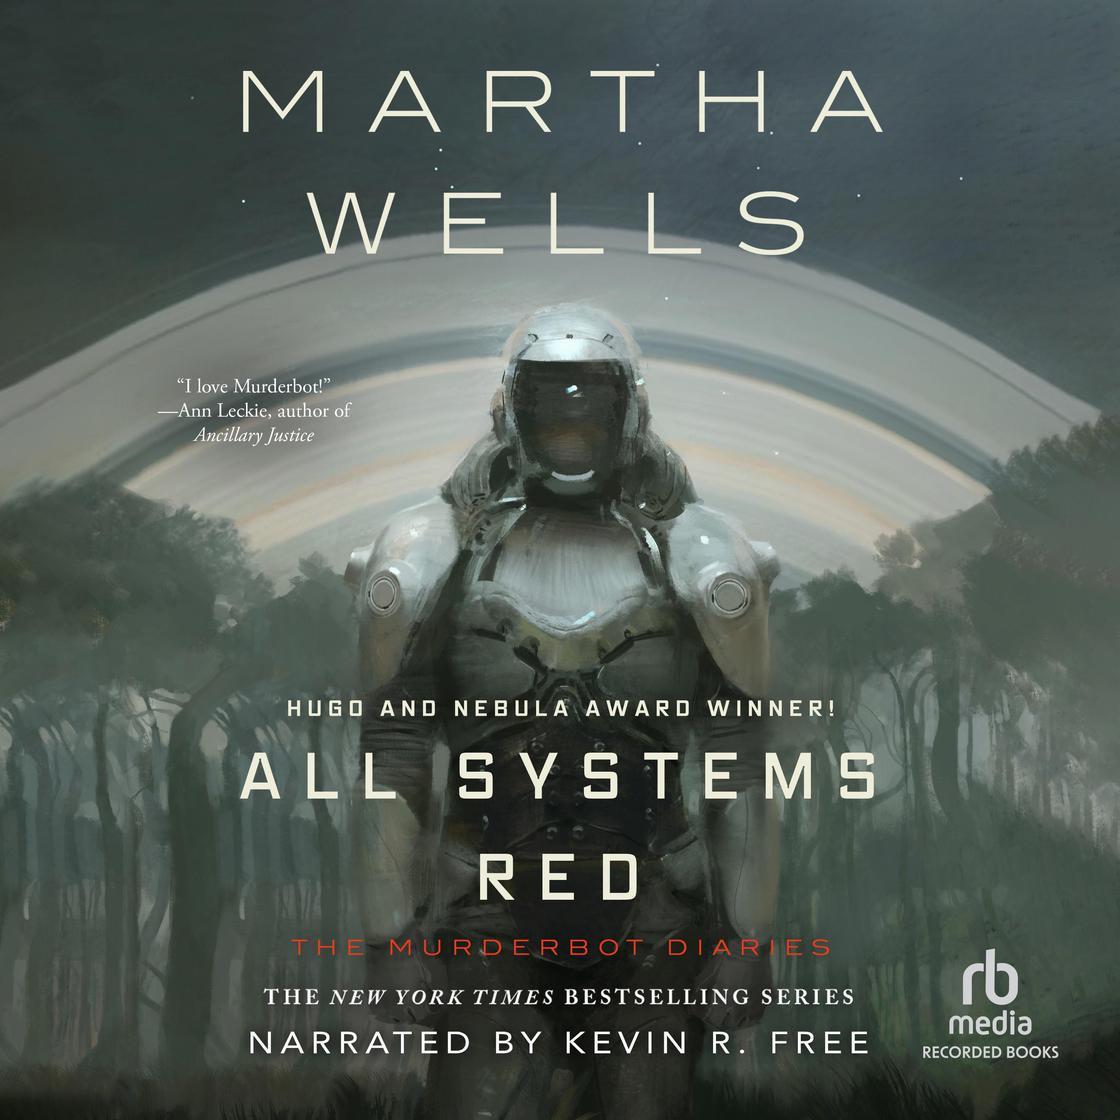 All systems red (2017)